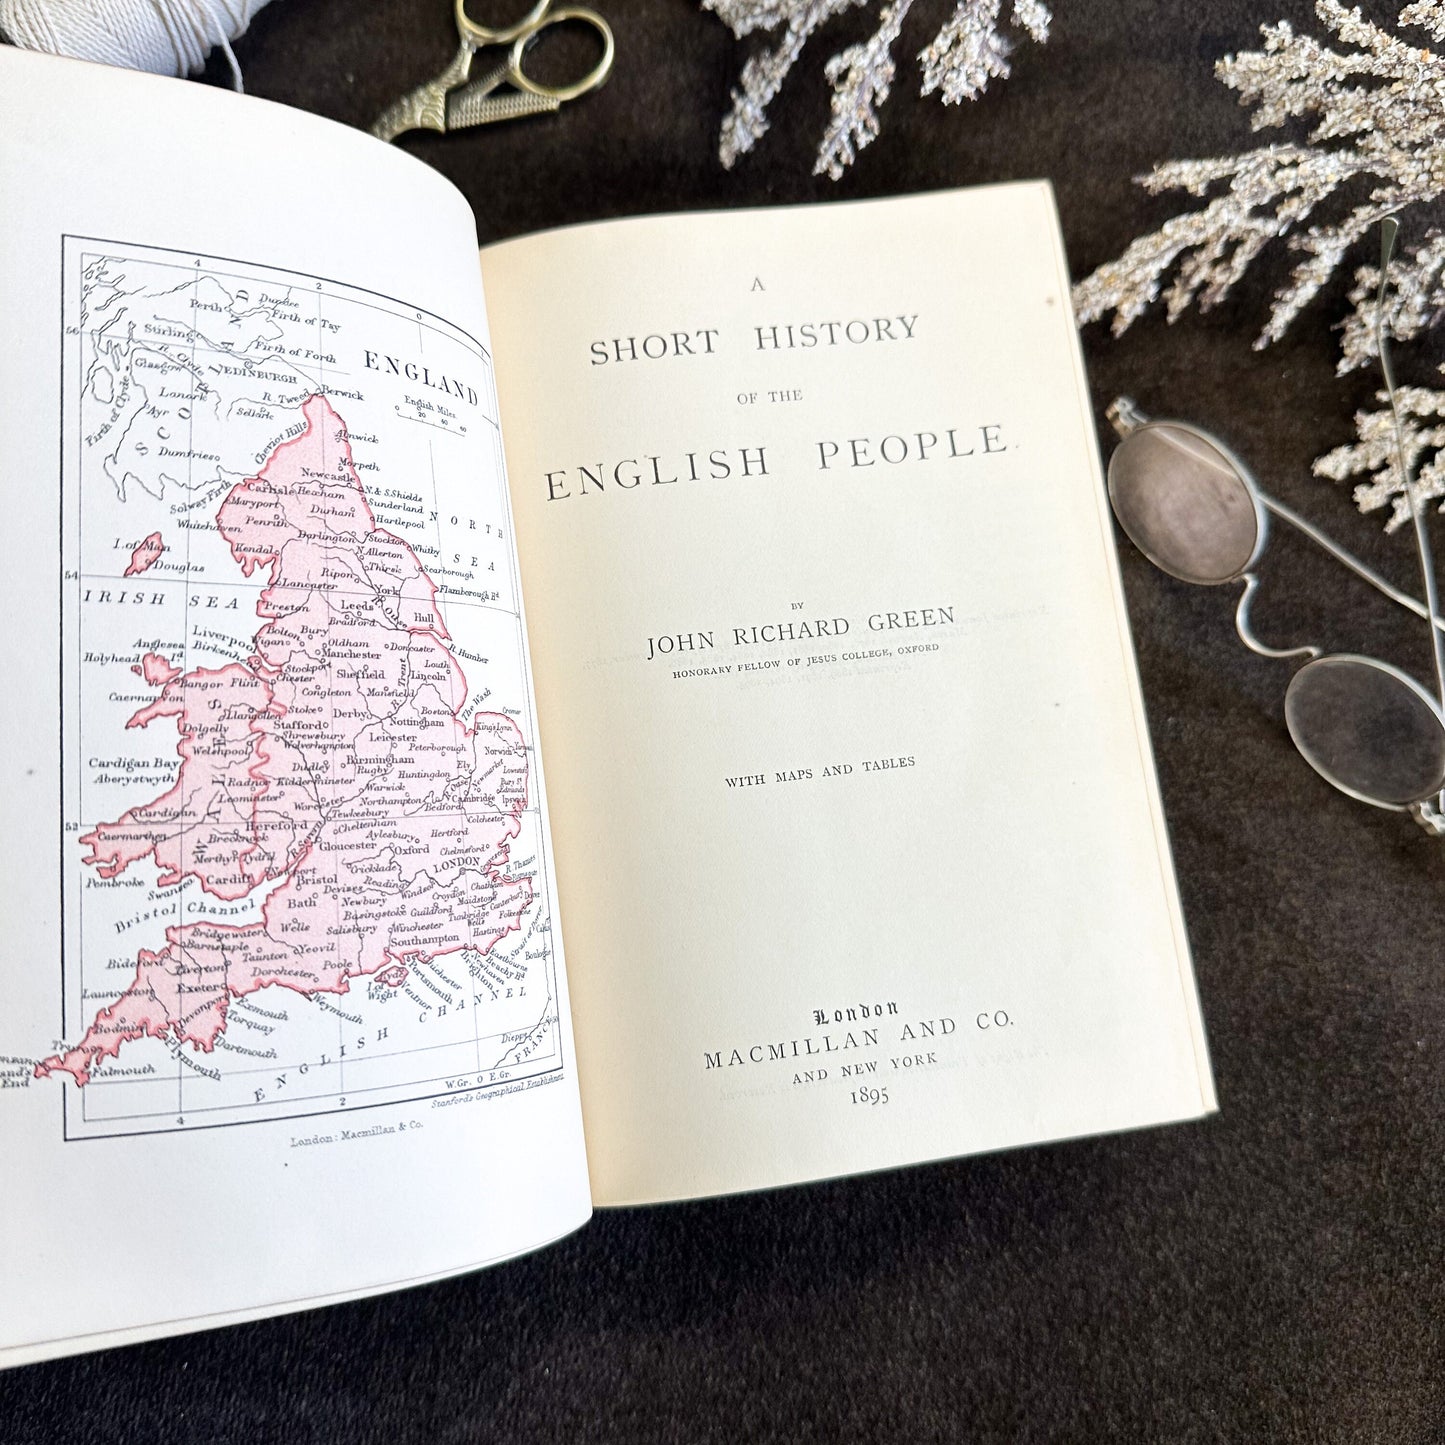 A Short History of the English People by John Richard Green